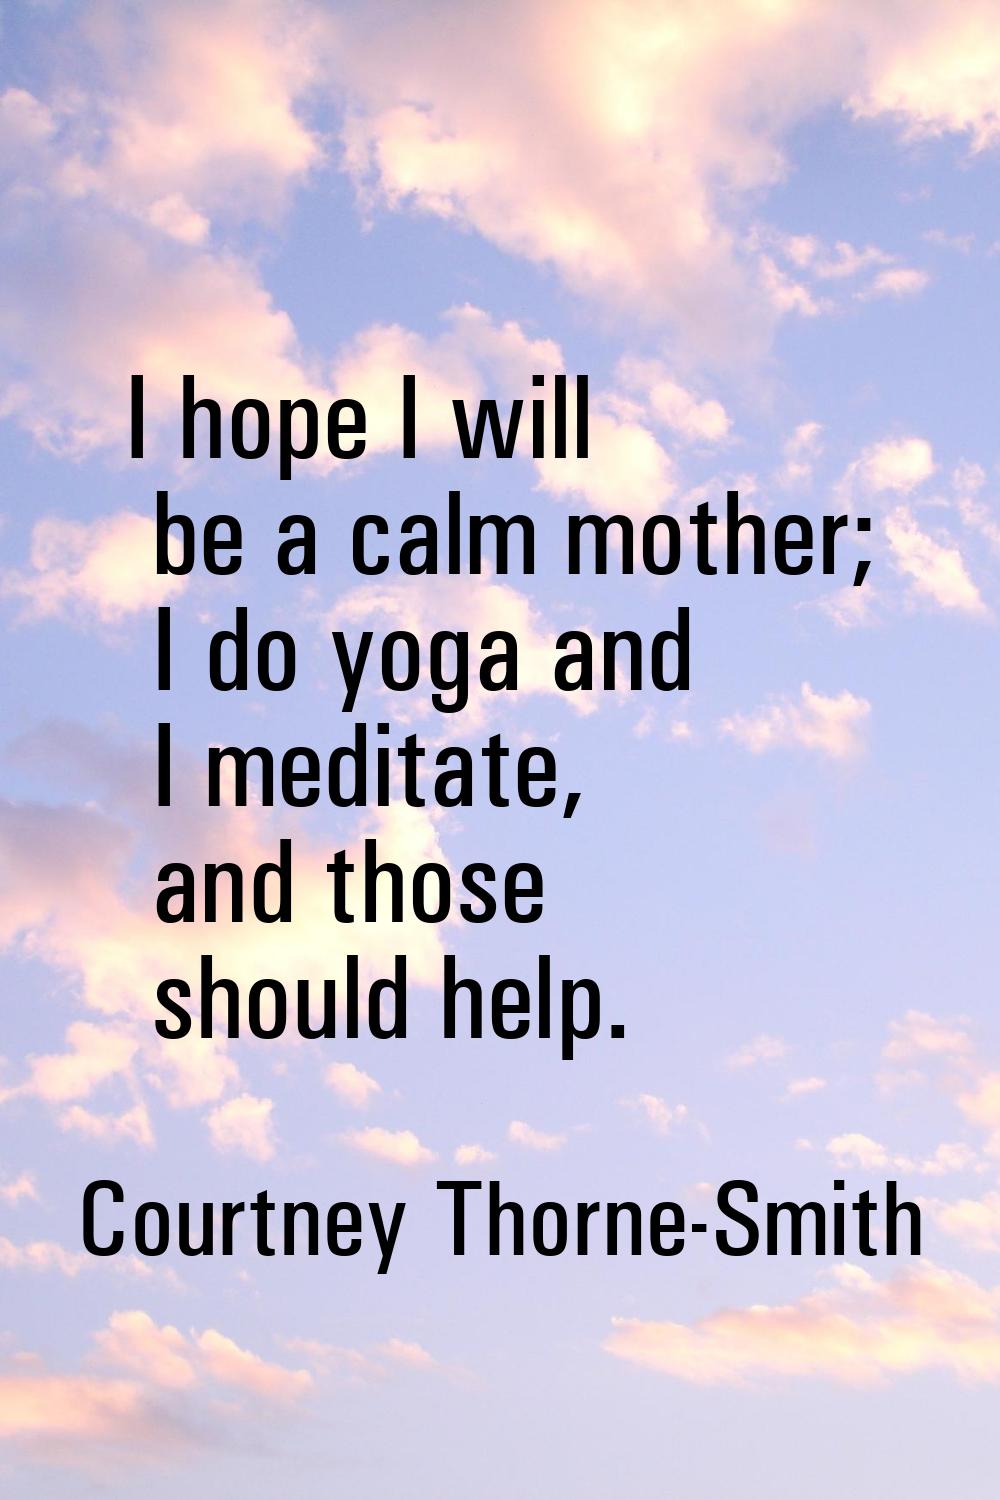 I hope I will be a calm mother; I do yoga and I meditate, and those should help.